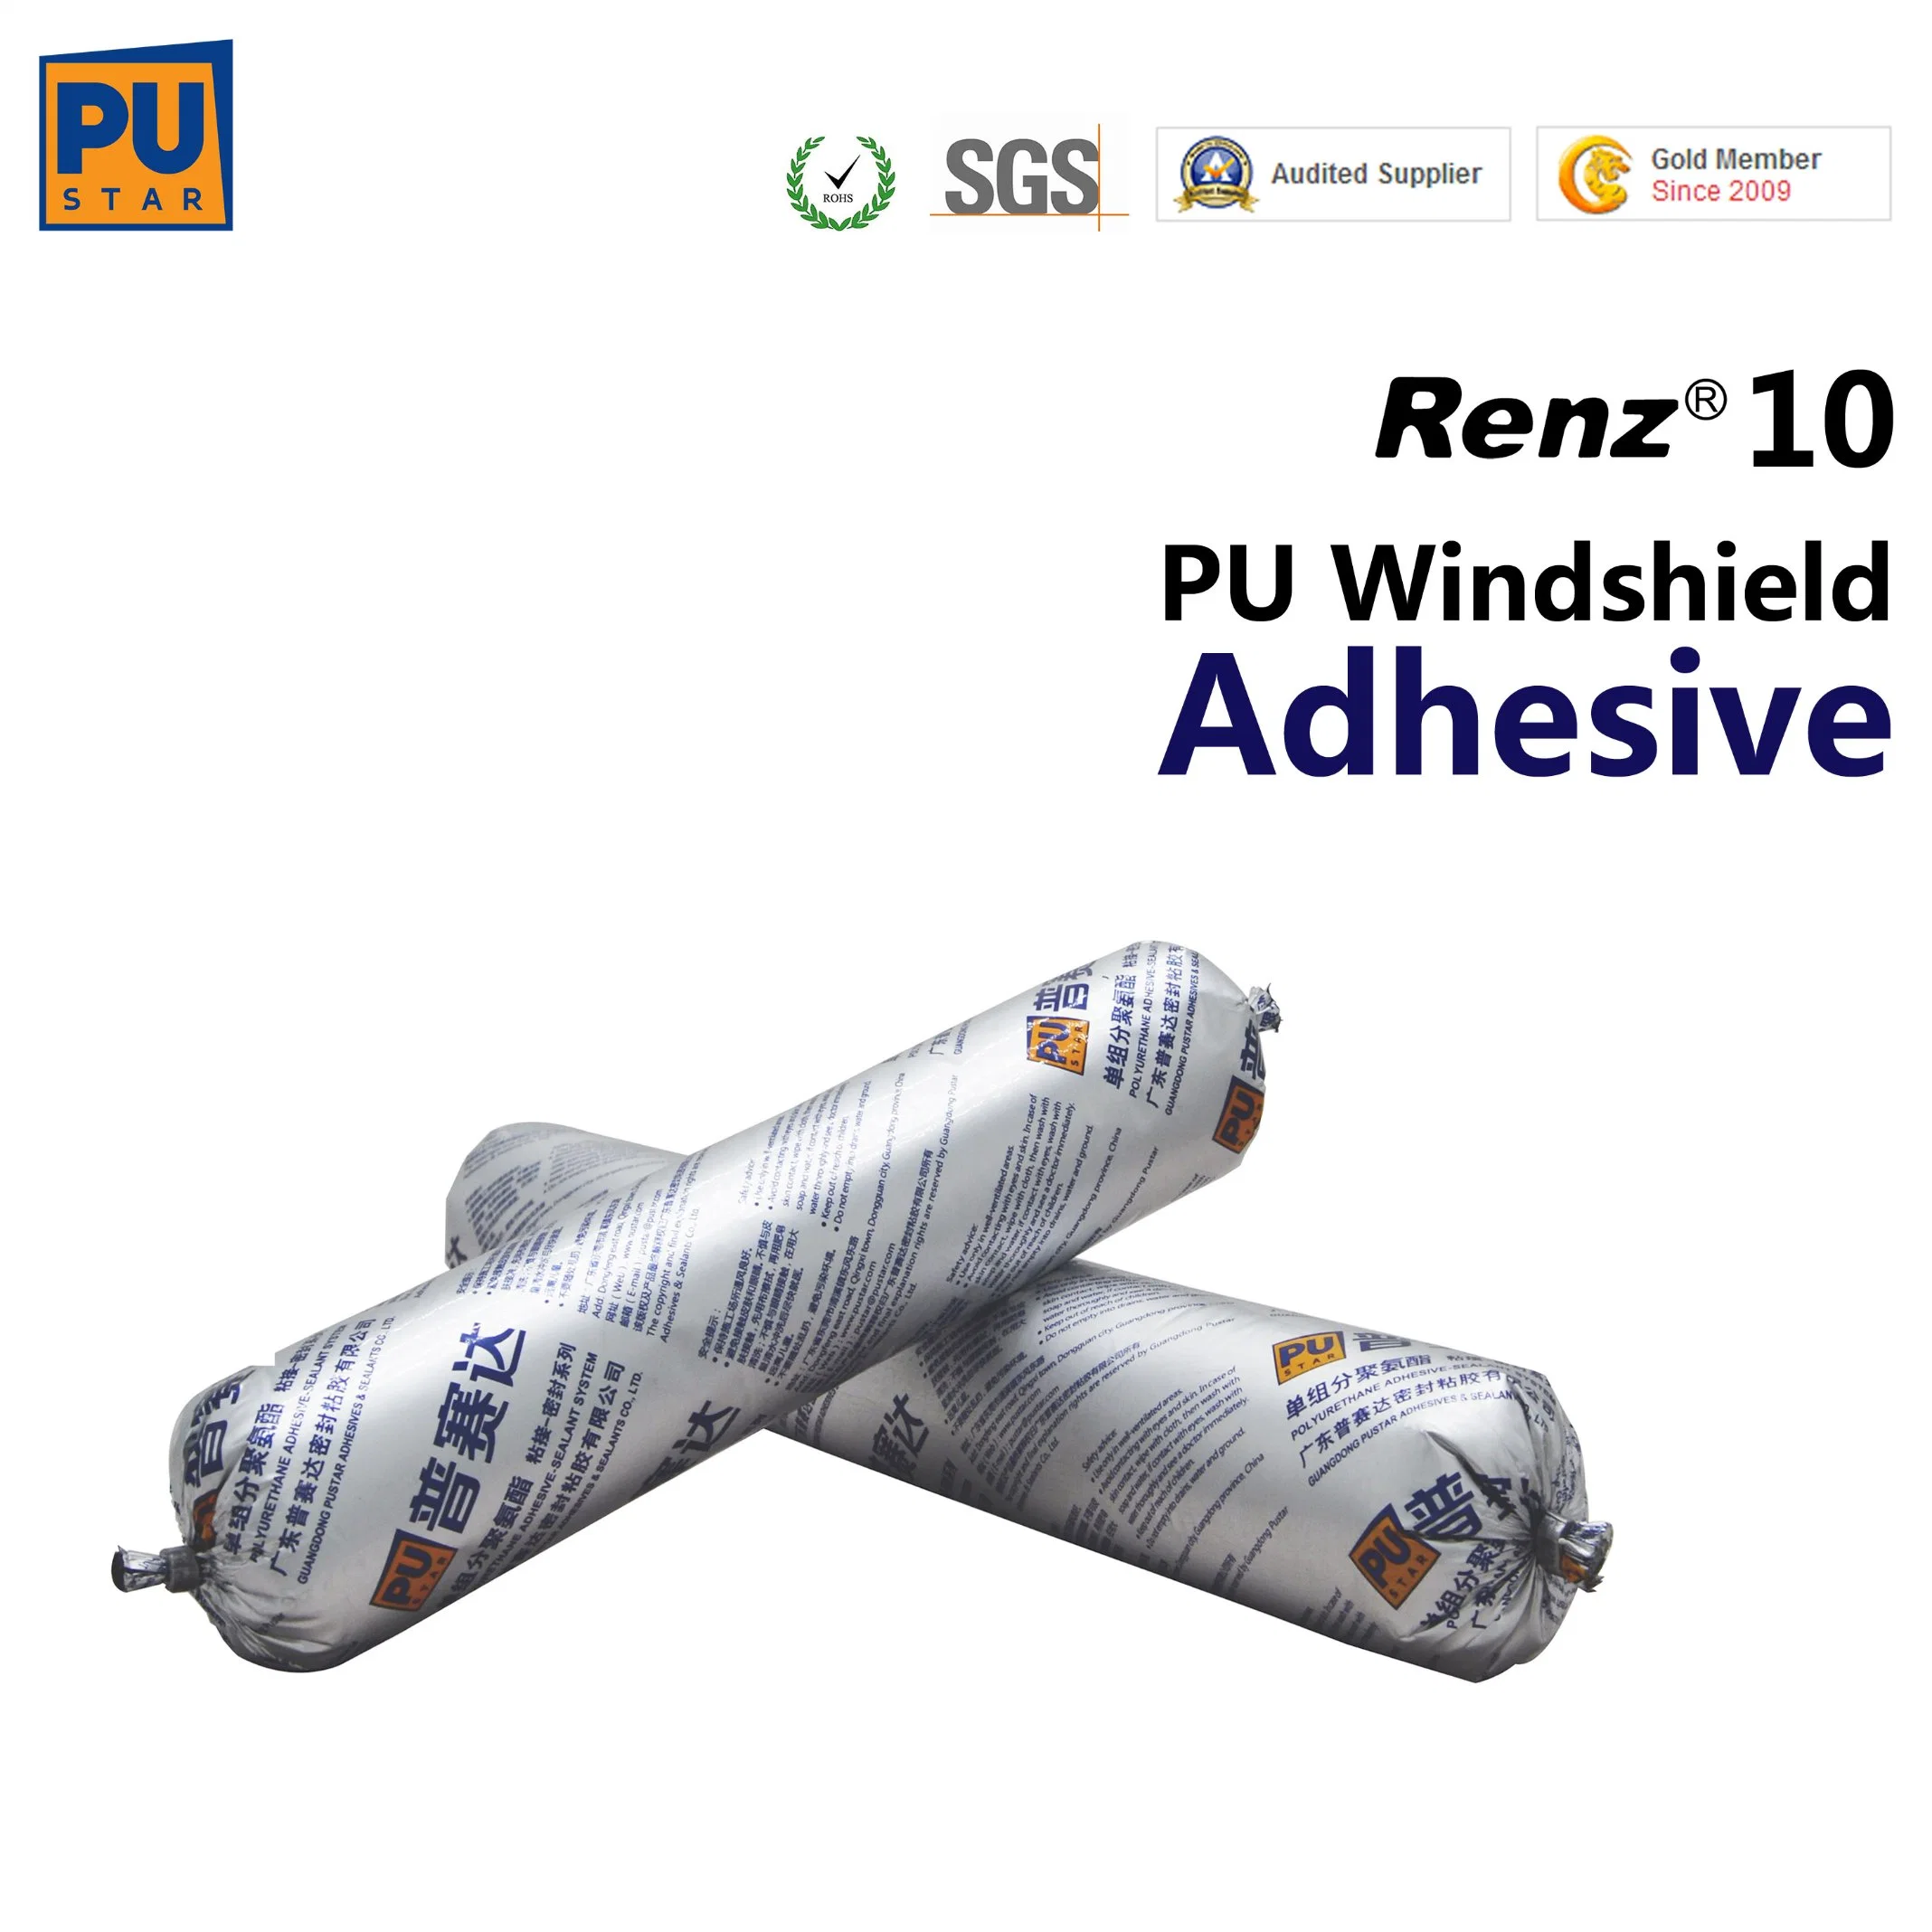 Renz 10 Polyurethane Adhesive Sealant for Construction and DIY Projects